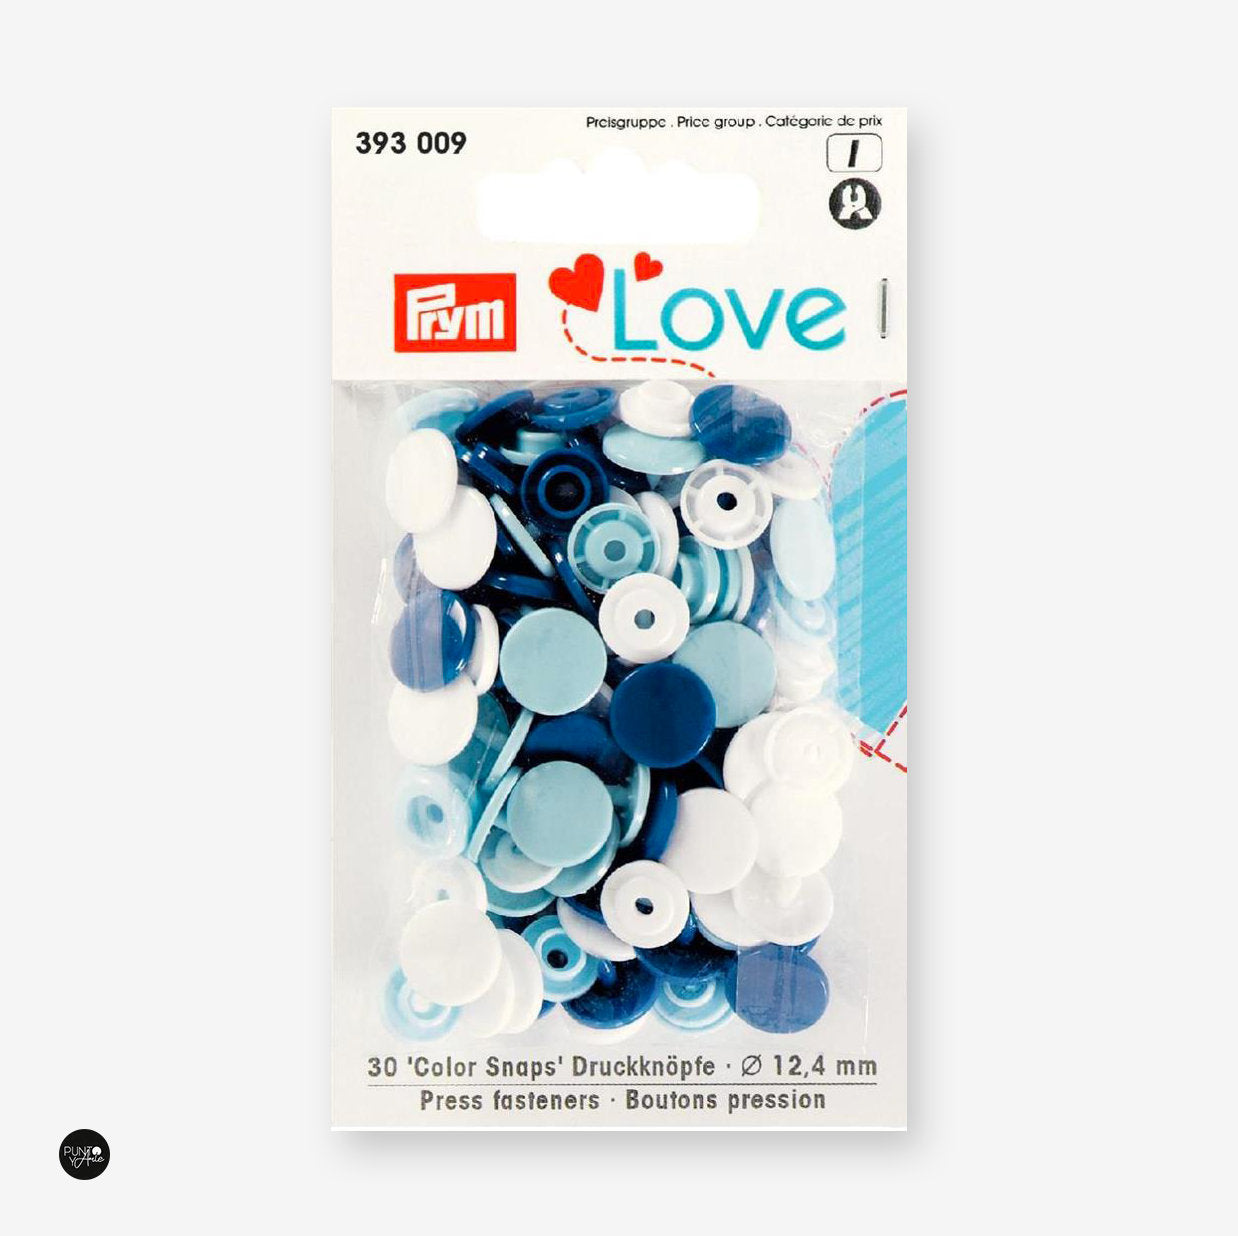 Press Buttons Or Snaps 12.44 mm - Prym Love 393009